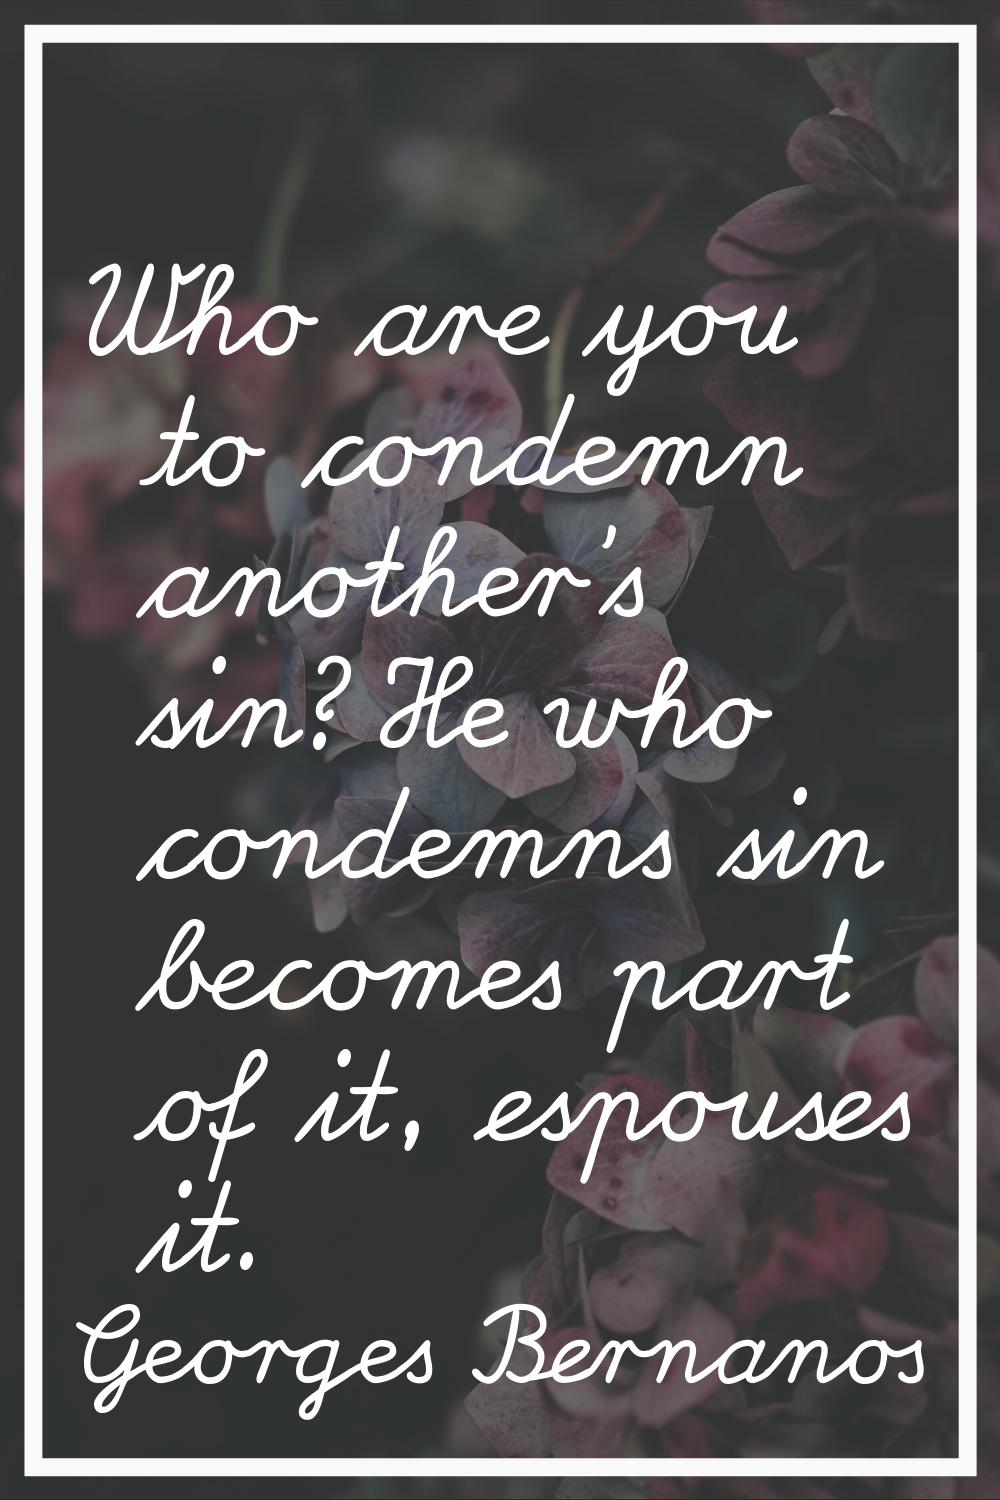 Who are you to condemn another's sin? He who condemns sin becomes part of it, espouses it.